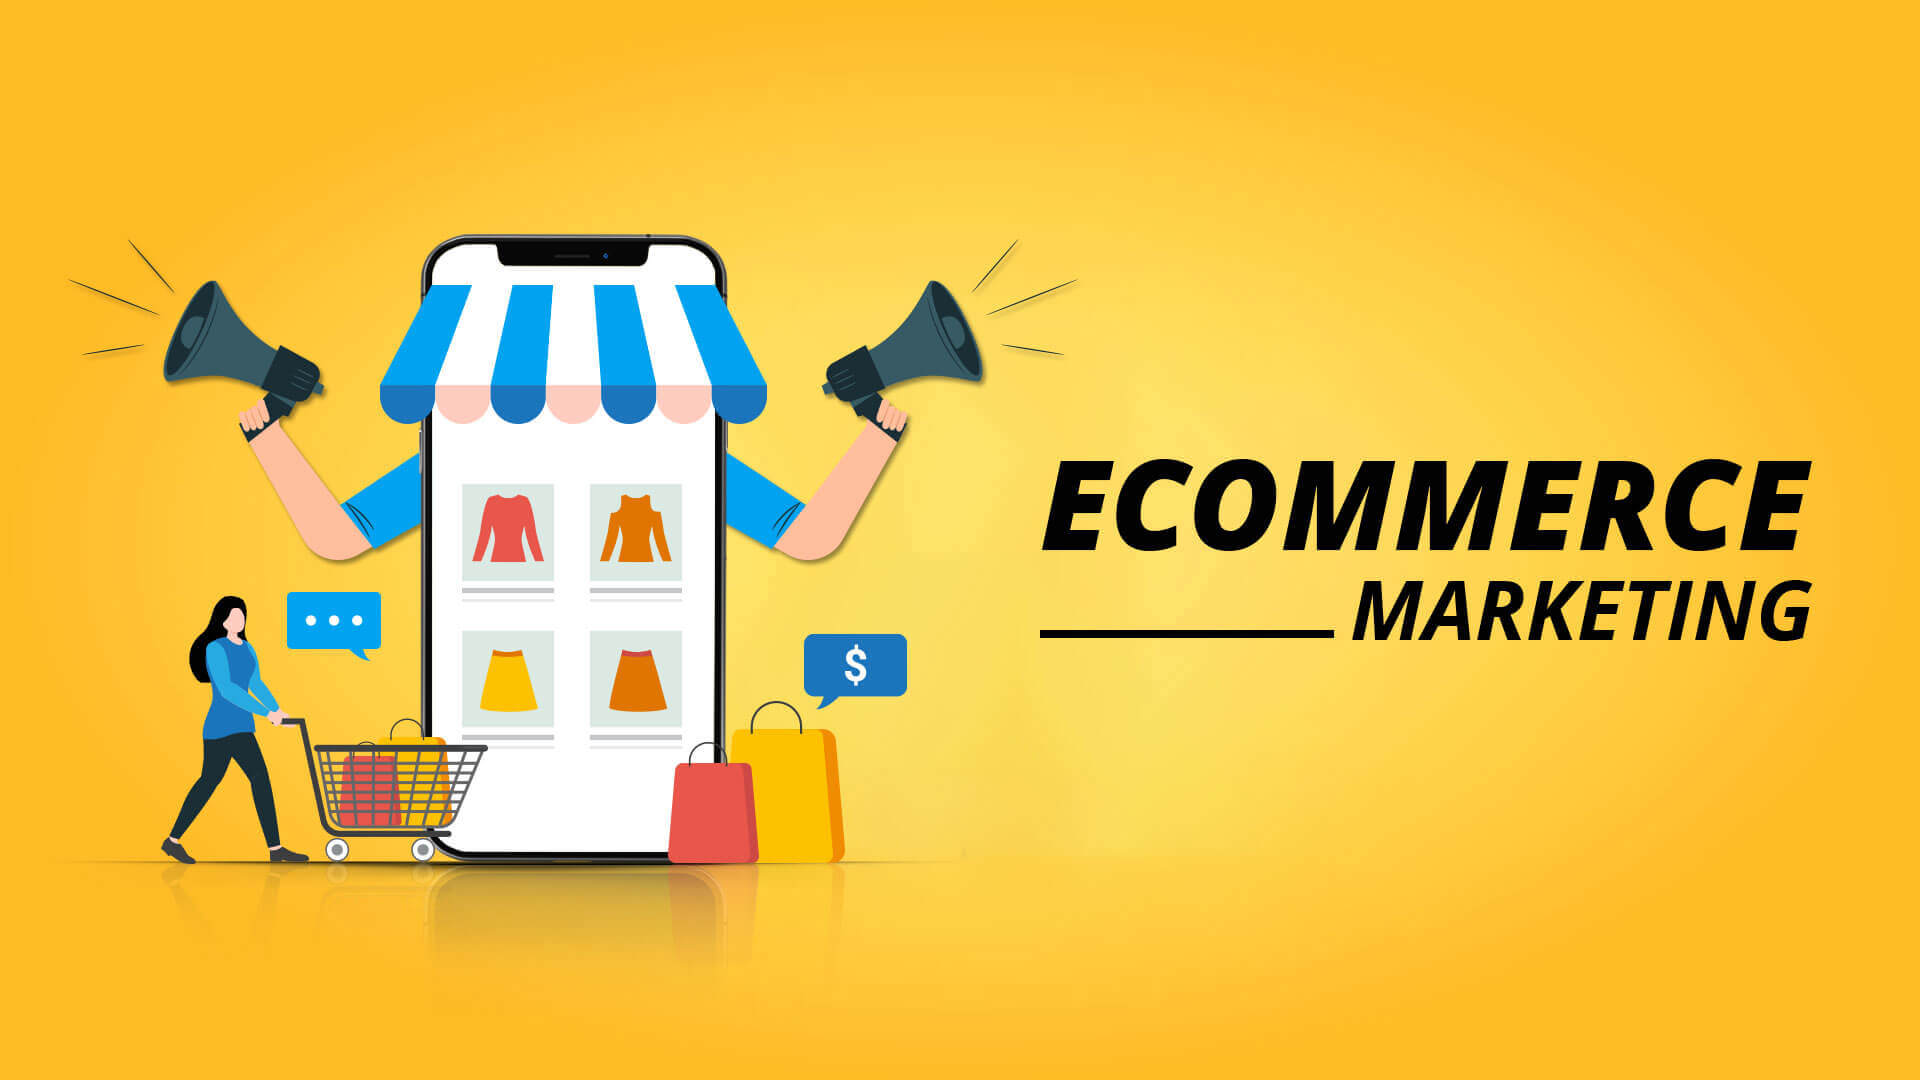 Explore eCommerce marketing strategies to build and implement a successful eCommerce marketing plan in 2022